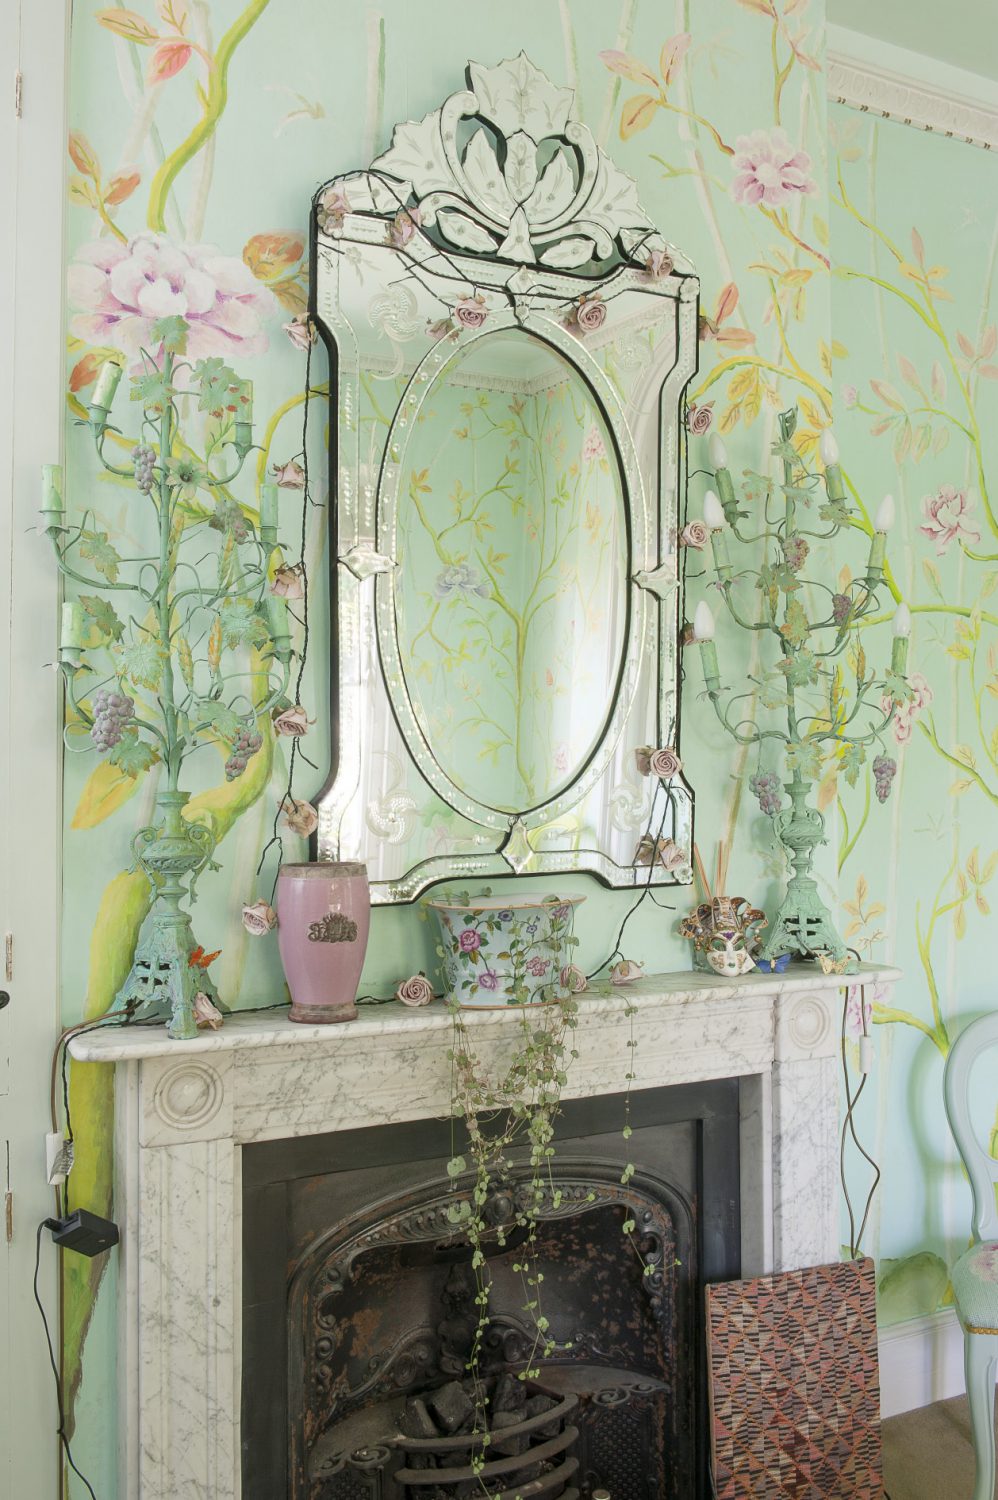 Kaffe and Brandon had originally intended to paper the dining room with hand painted Chinese wallpaper, but Kaffe painted straight over the original paper with Duck Egg Blue and an intricate design of bamboo and peonies